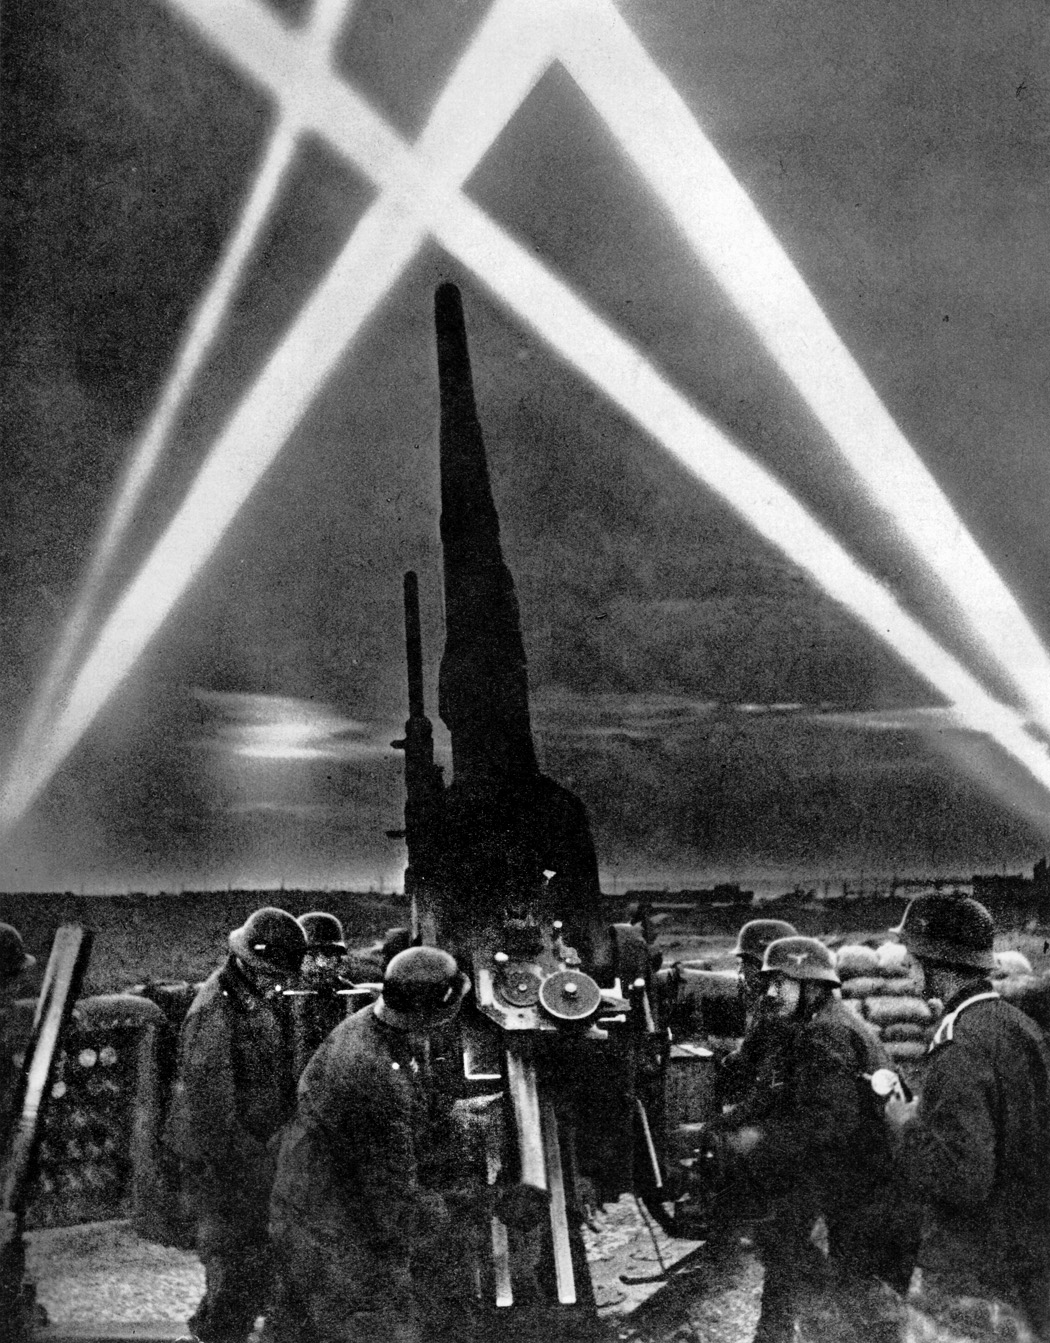 A German antiaircraft gun crew prepares for action in 1940, as searchlights pierce the night sky to illuminate targets for the gunners.  